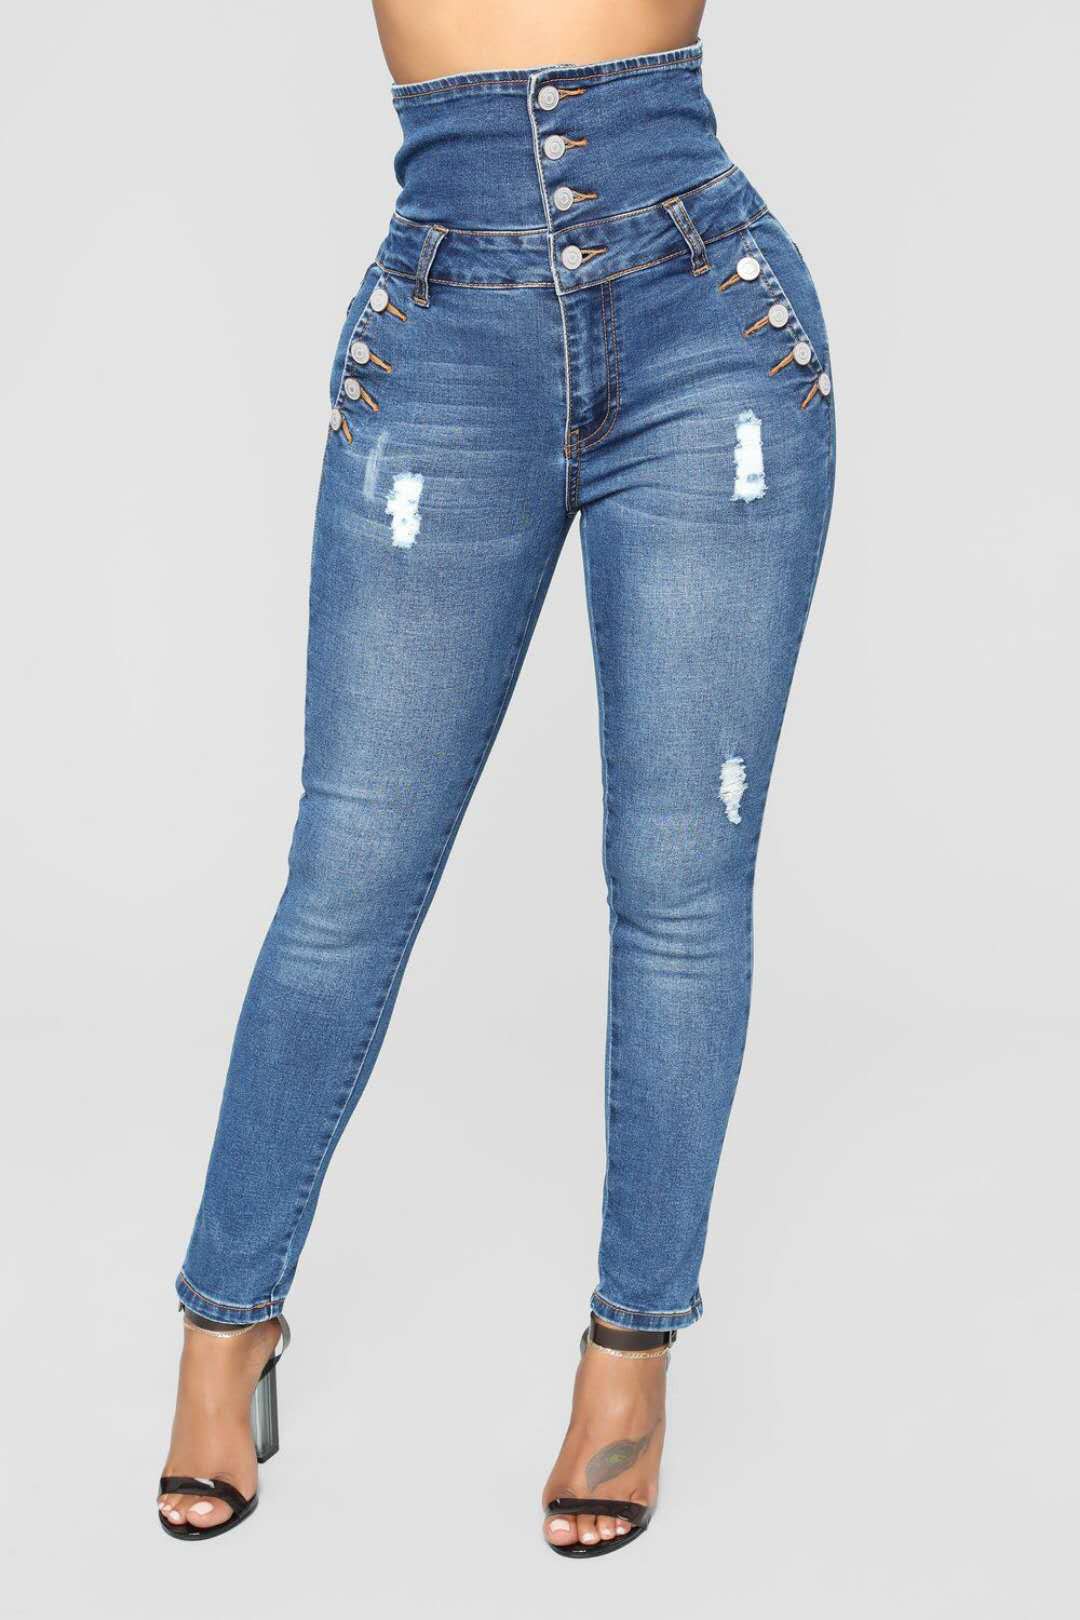 Ripped hole fashion Jeans for Women